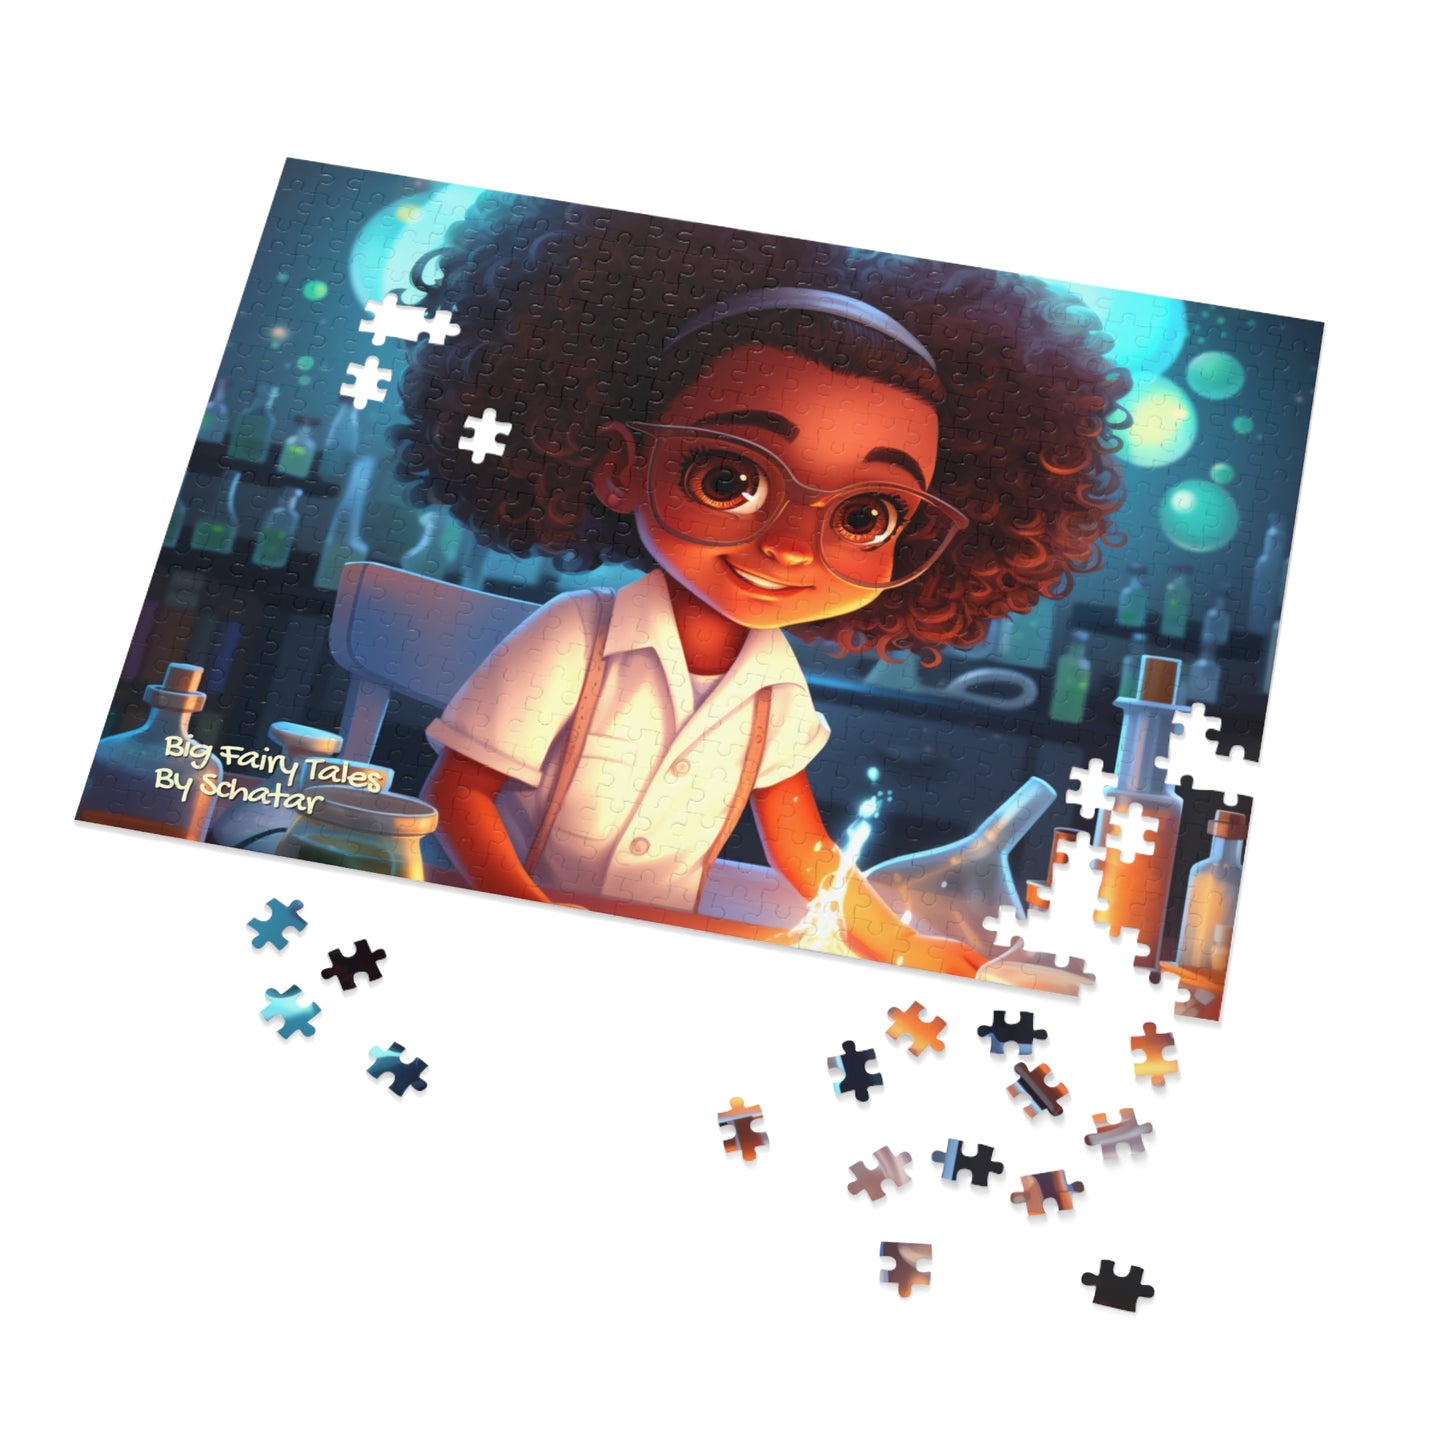 Scientist - Big Little Professionals Puzzle 13 From Big Fairy Tales By Schatar